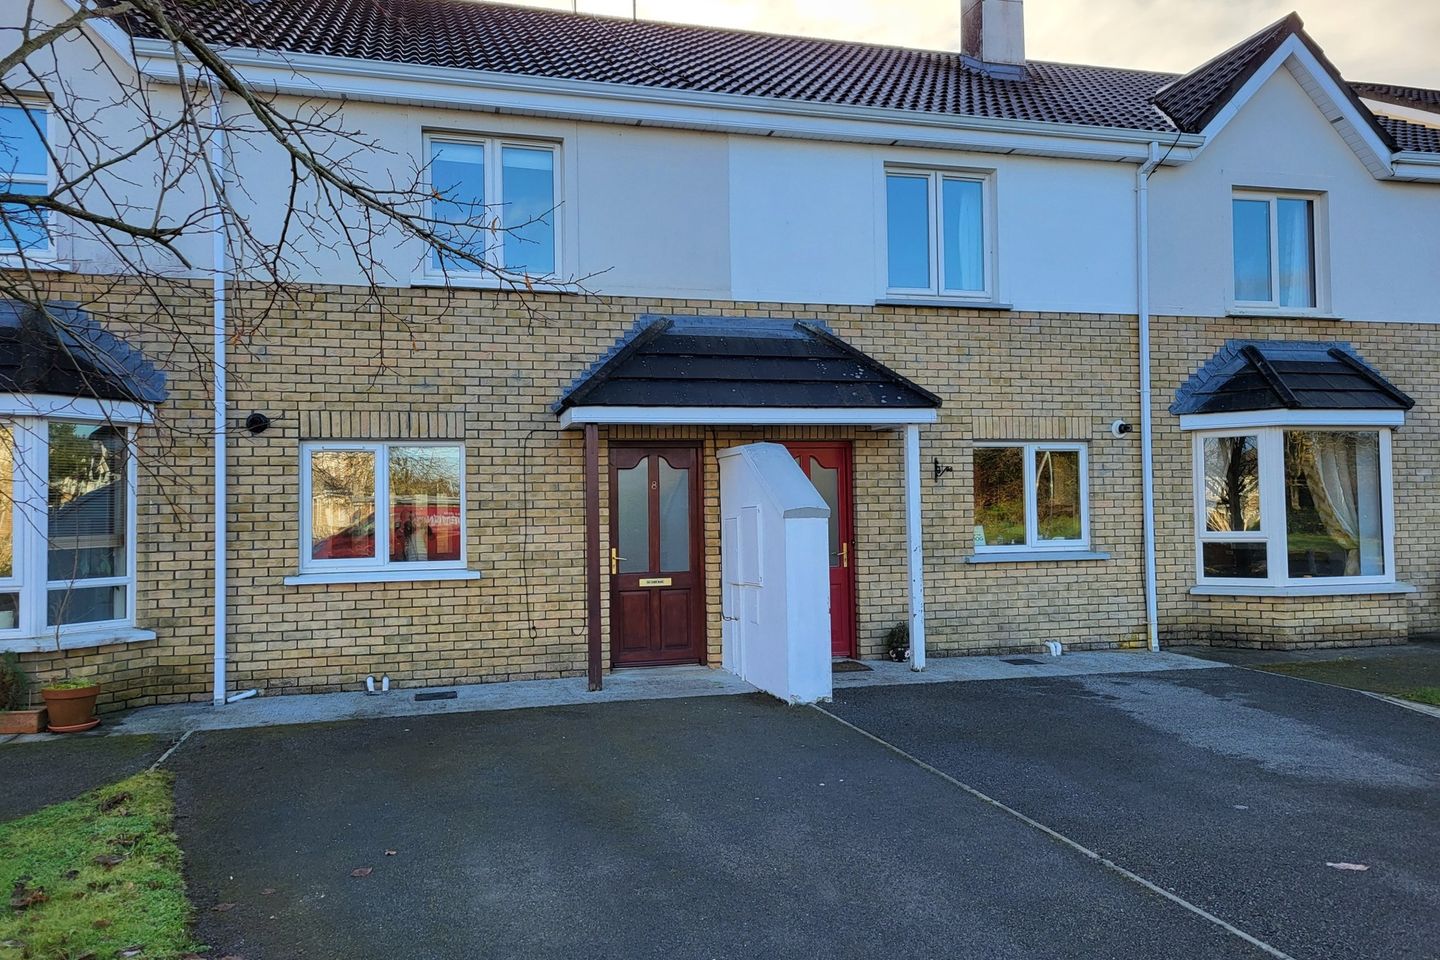 8 Cill Ban, Collins Lane, Tullamore, Co. Offaly, R35F9R3